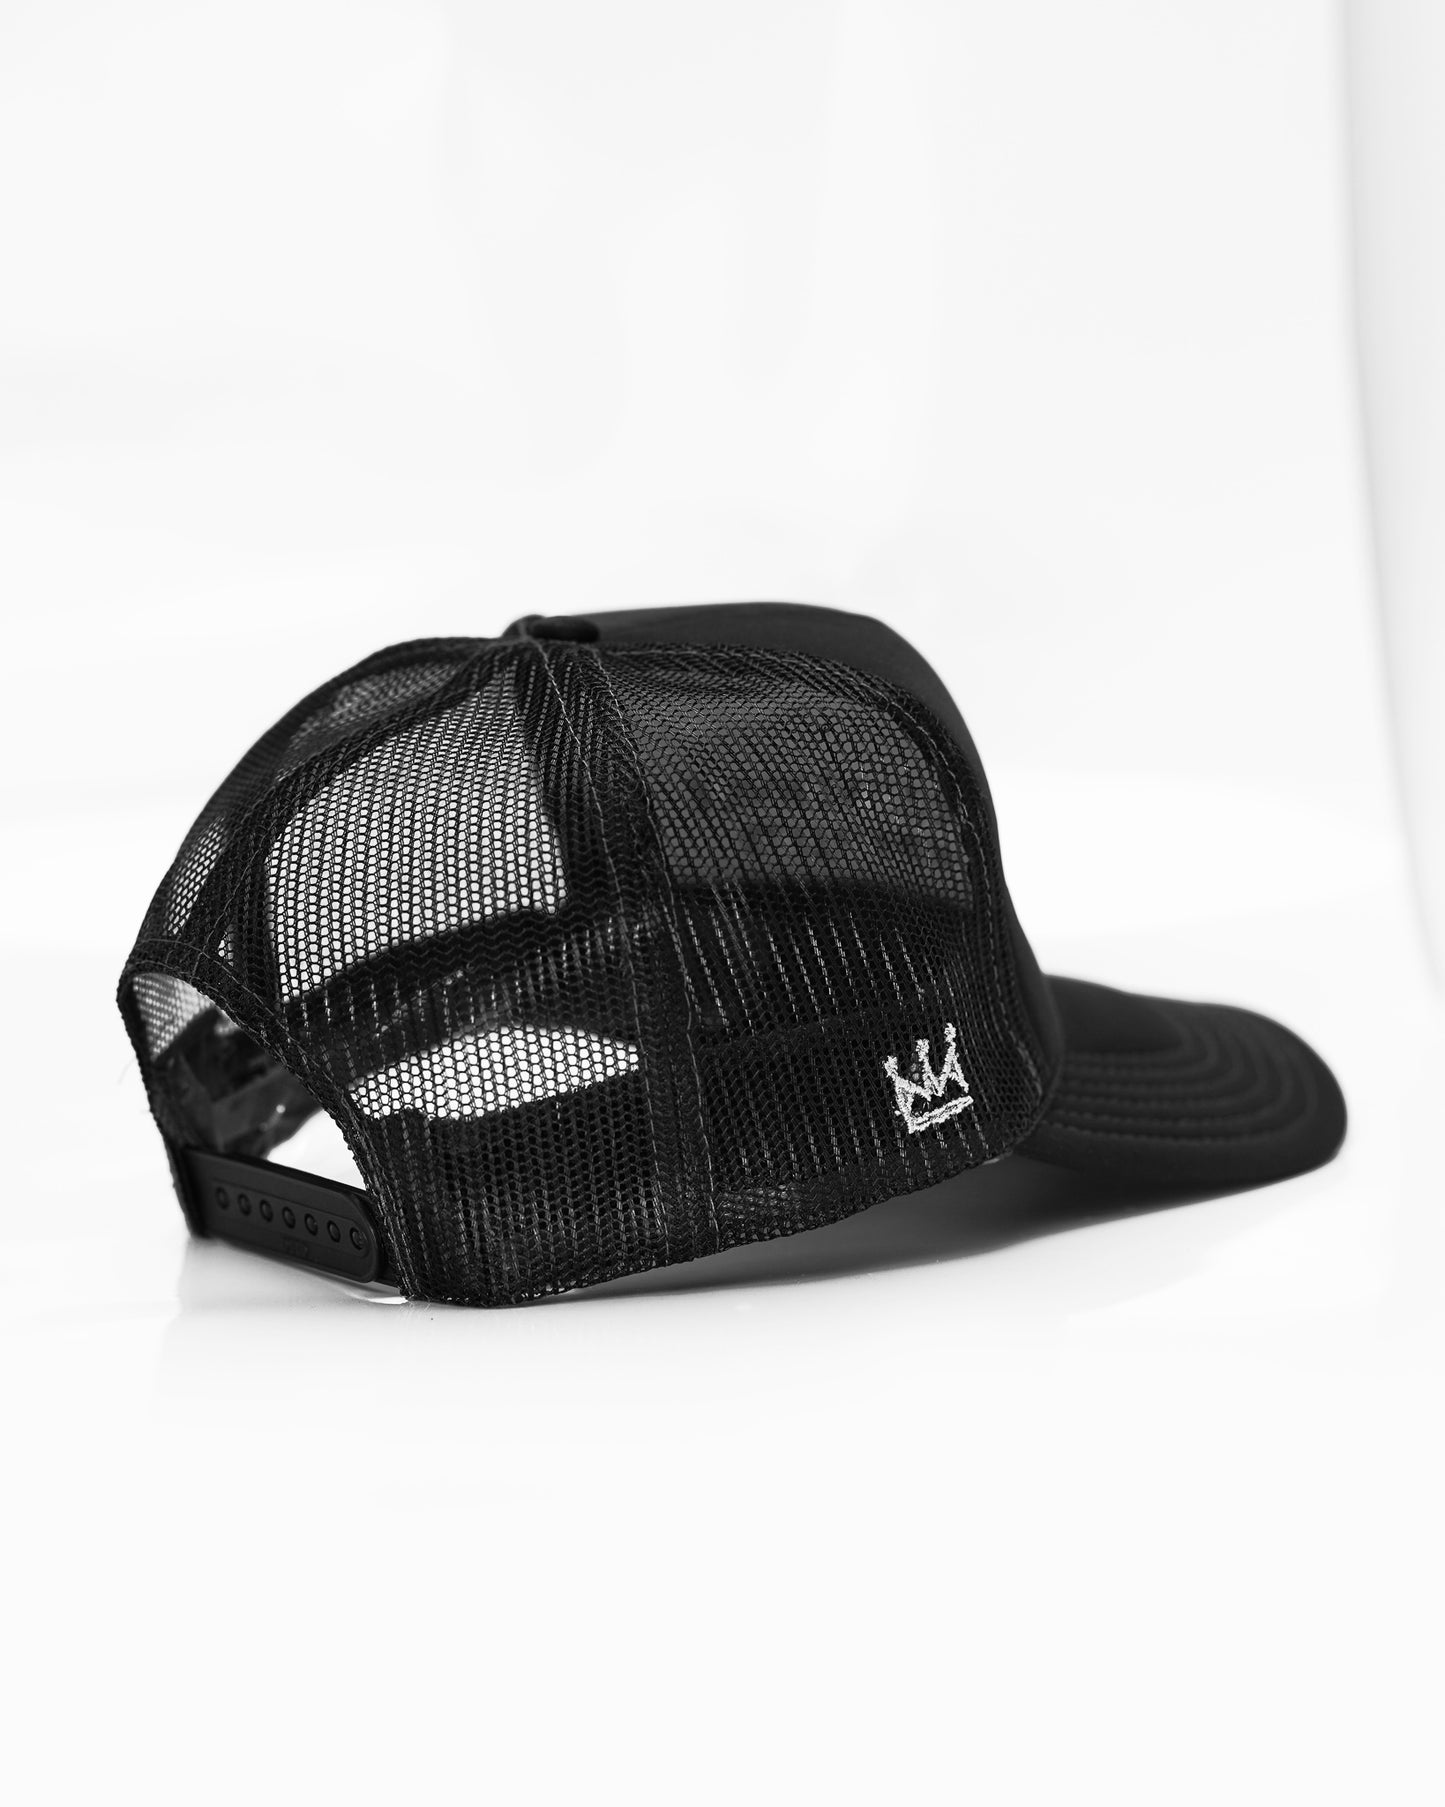 Lord Protect Me While I’m In These Streets Trucker Hat in Black